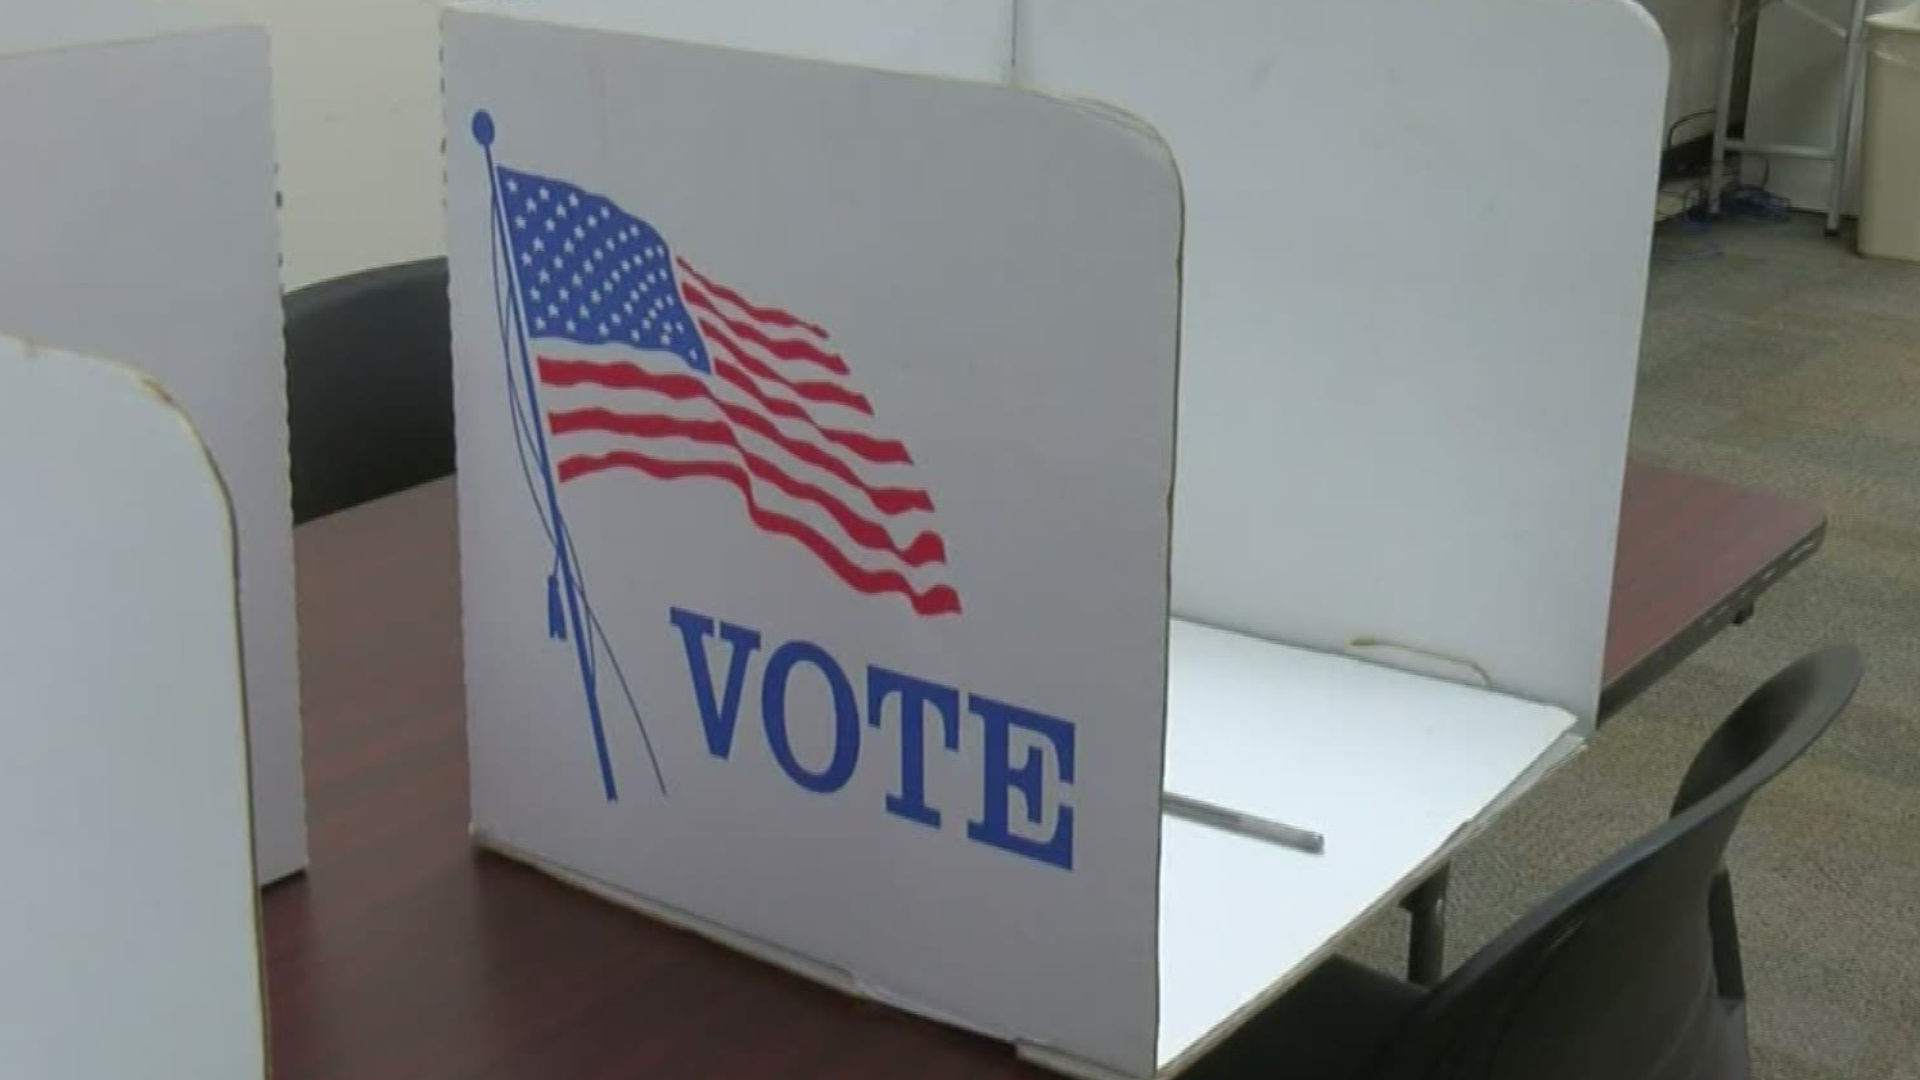 Tuesday marked the start of the early voting period for Toledo and Maumee residents for this September's primary election.